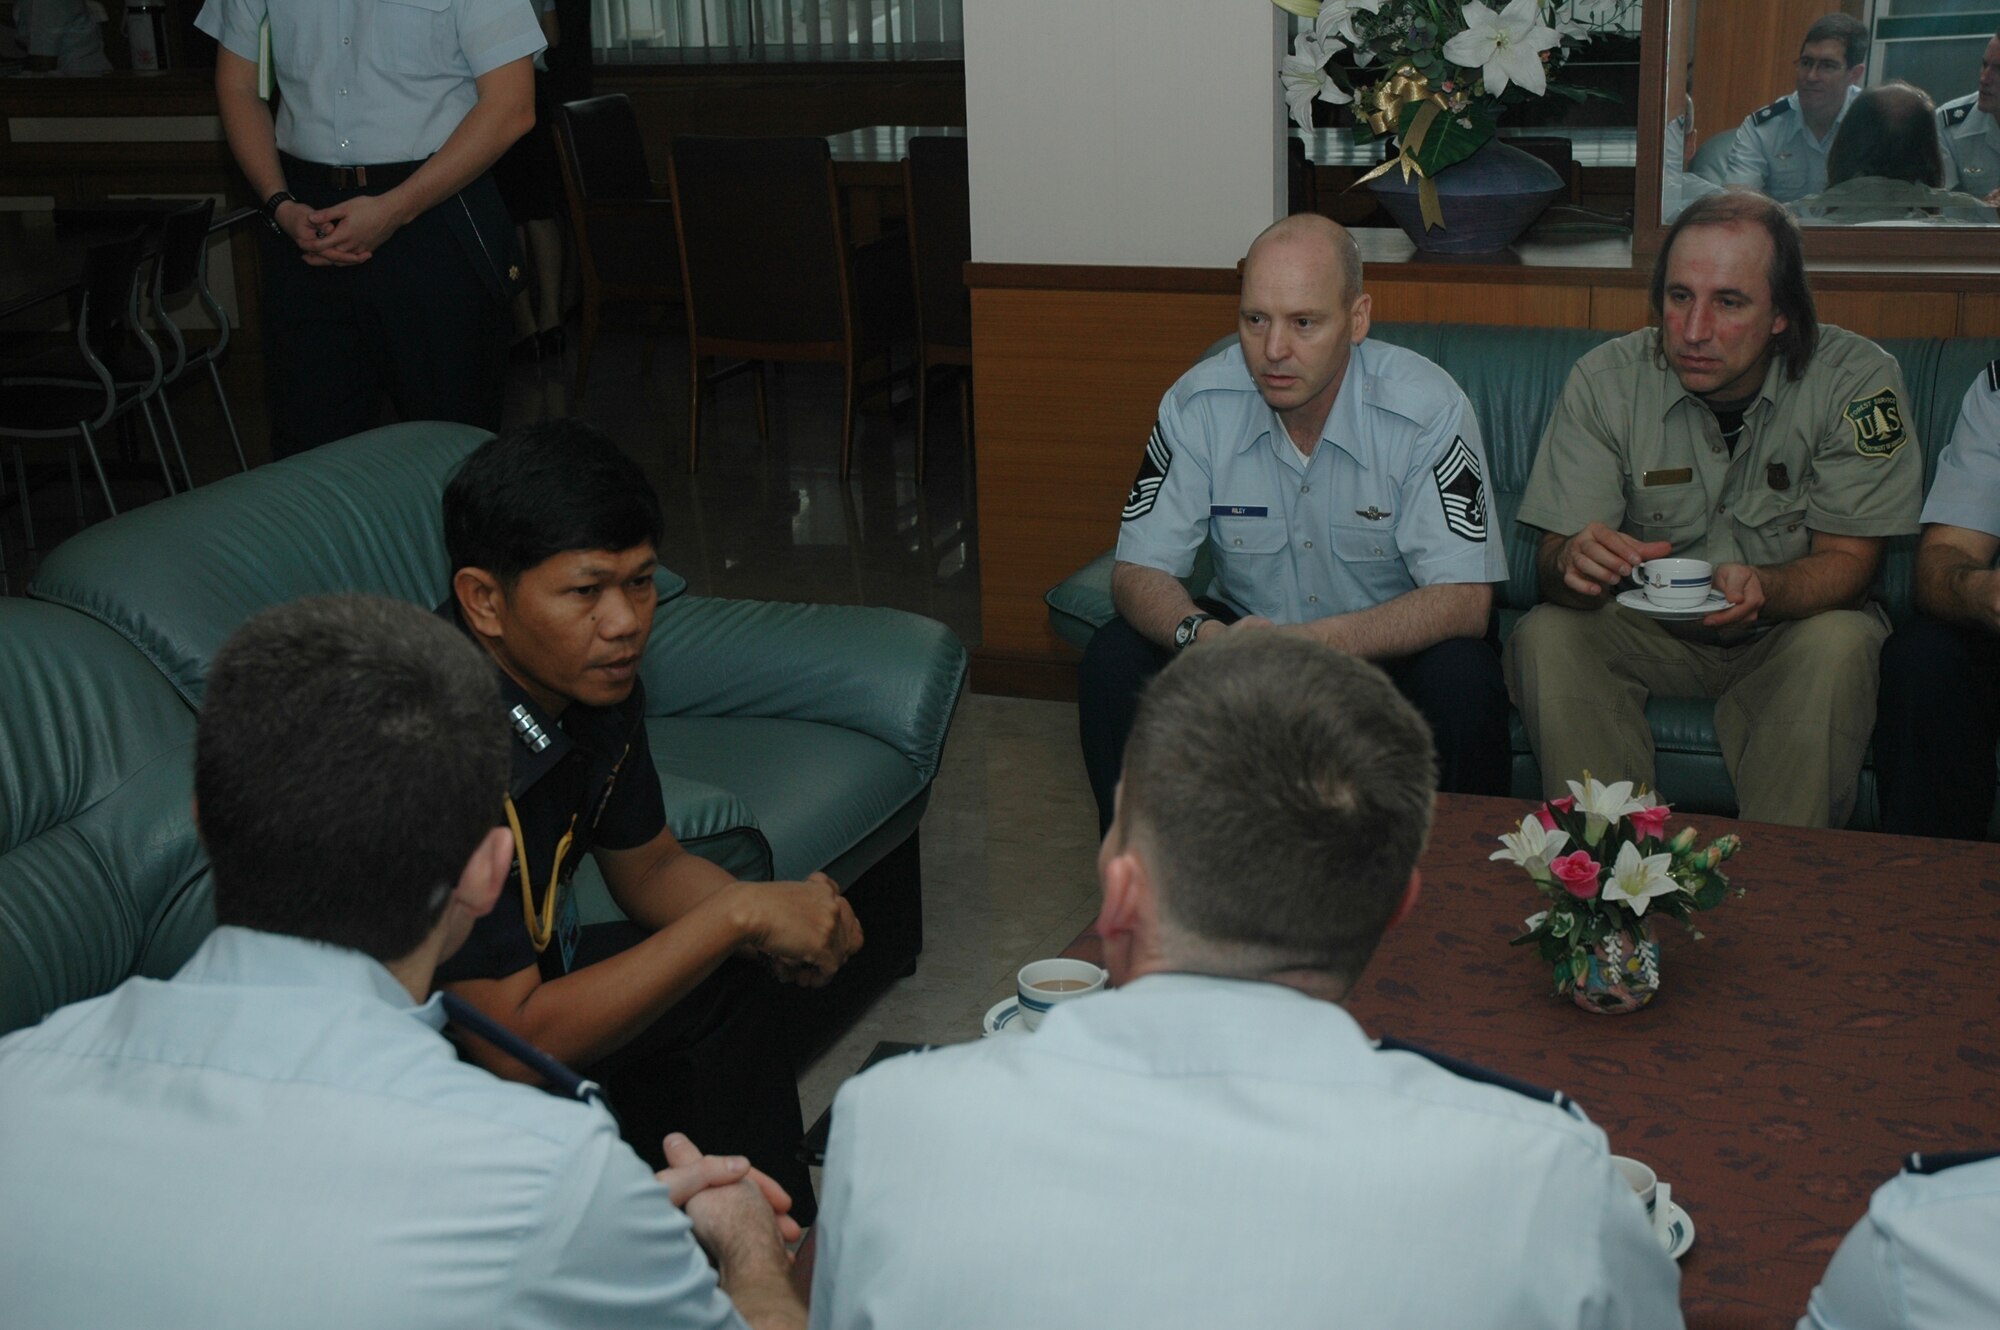 Chief Master Sgt. James D. Riley, chief loadmaster with the Air Force Reserve’s 302nd Airlift Wing, listens to Group Captain Nimit Kraigratoke, deputy director, Special Task Division, Royal Thai Air Force discuss aerial firefighting in Thailand.  Seven members of the 302 AW traveled to Don Muang Royal Thai Air Force Base, Thailand to provide expert training to RTAF members on safe and effective Modular Airborne Firefighting System operations.  This event marks the first time the Air Force Reserve has sent delegates to train a foreign Air Force on use of the MAFFS equipment.  Accompanying the Air Force Reserve contingent is Mr. David P. Stickler, leadplane and instructor pilot with the U.S. Forest Service. (U.S. Air Force photo/Capt. Jody L. Ritchie)